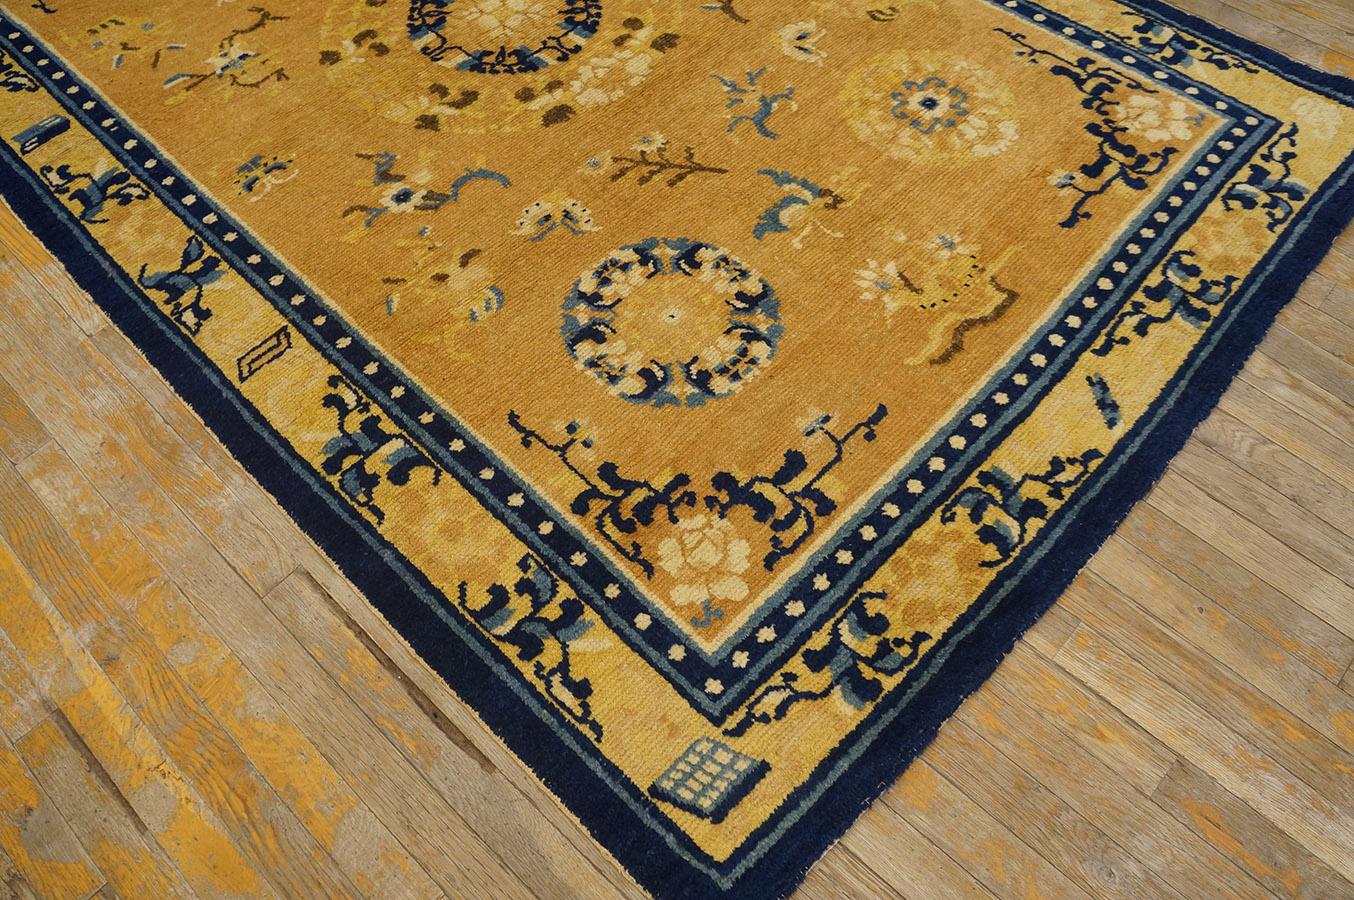 Wool Late 18th Century Chinese Ningxia Carpet ( 5' x 8' 1'' - 152 x 246 cm ) For Sale